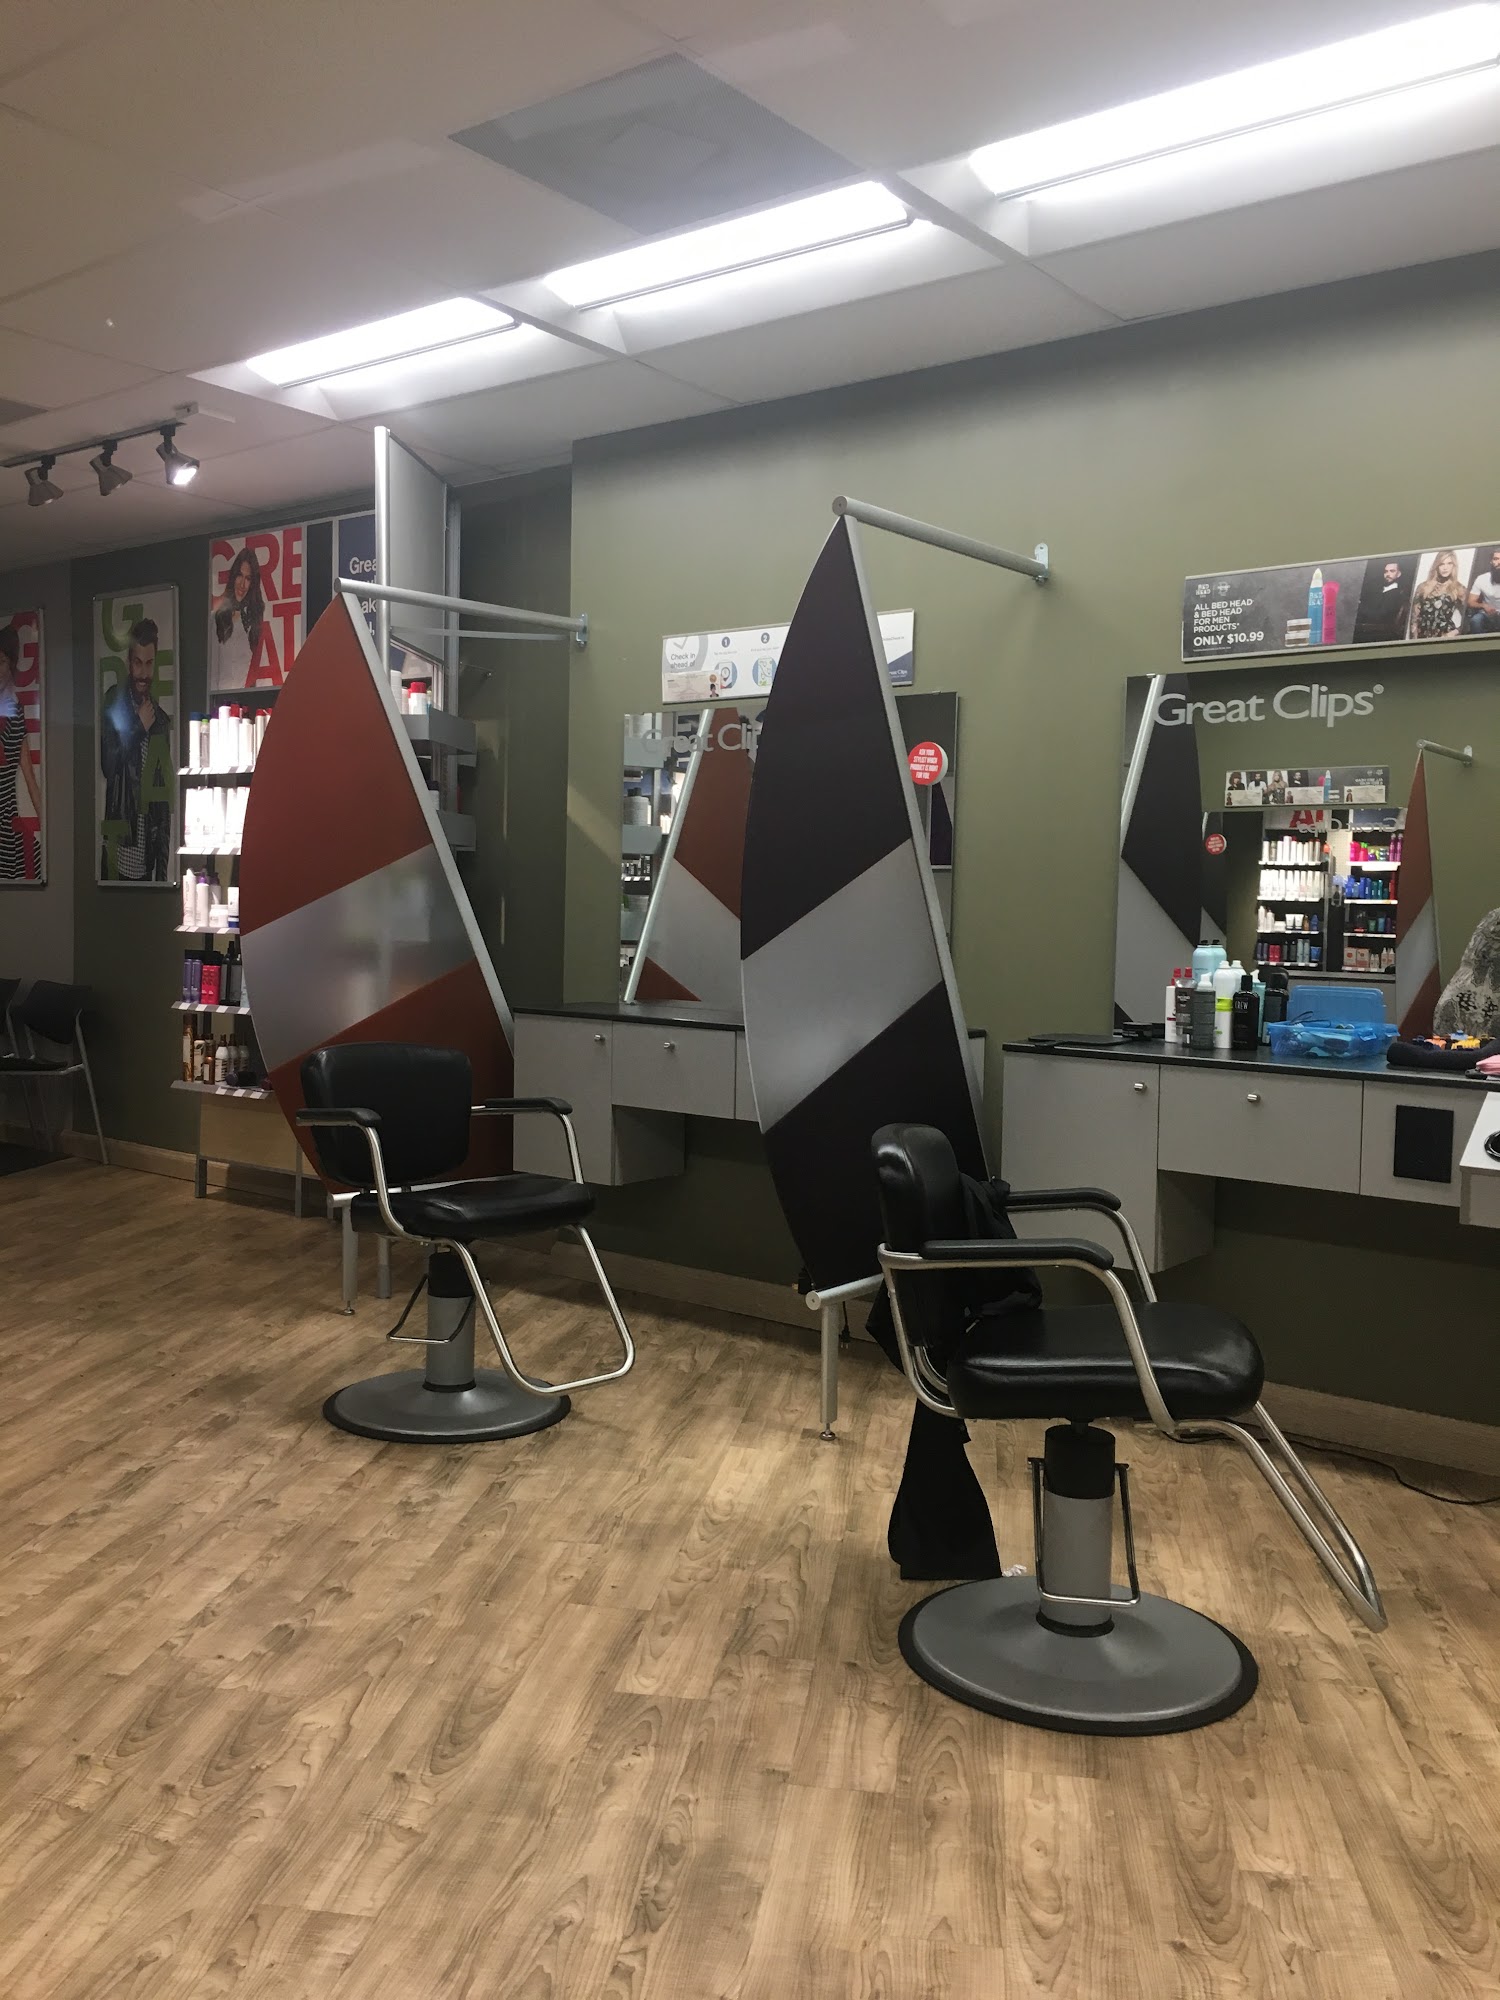 Great Clips 450094 State Rd 200 Ste 7A, Callahan Florida 32011